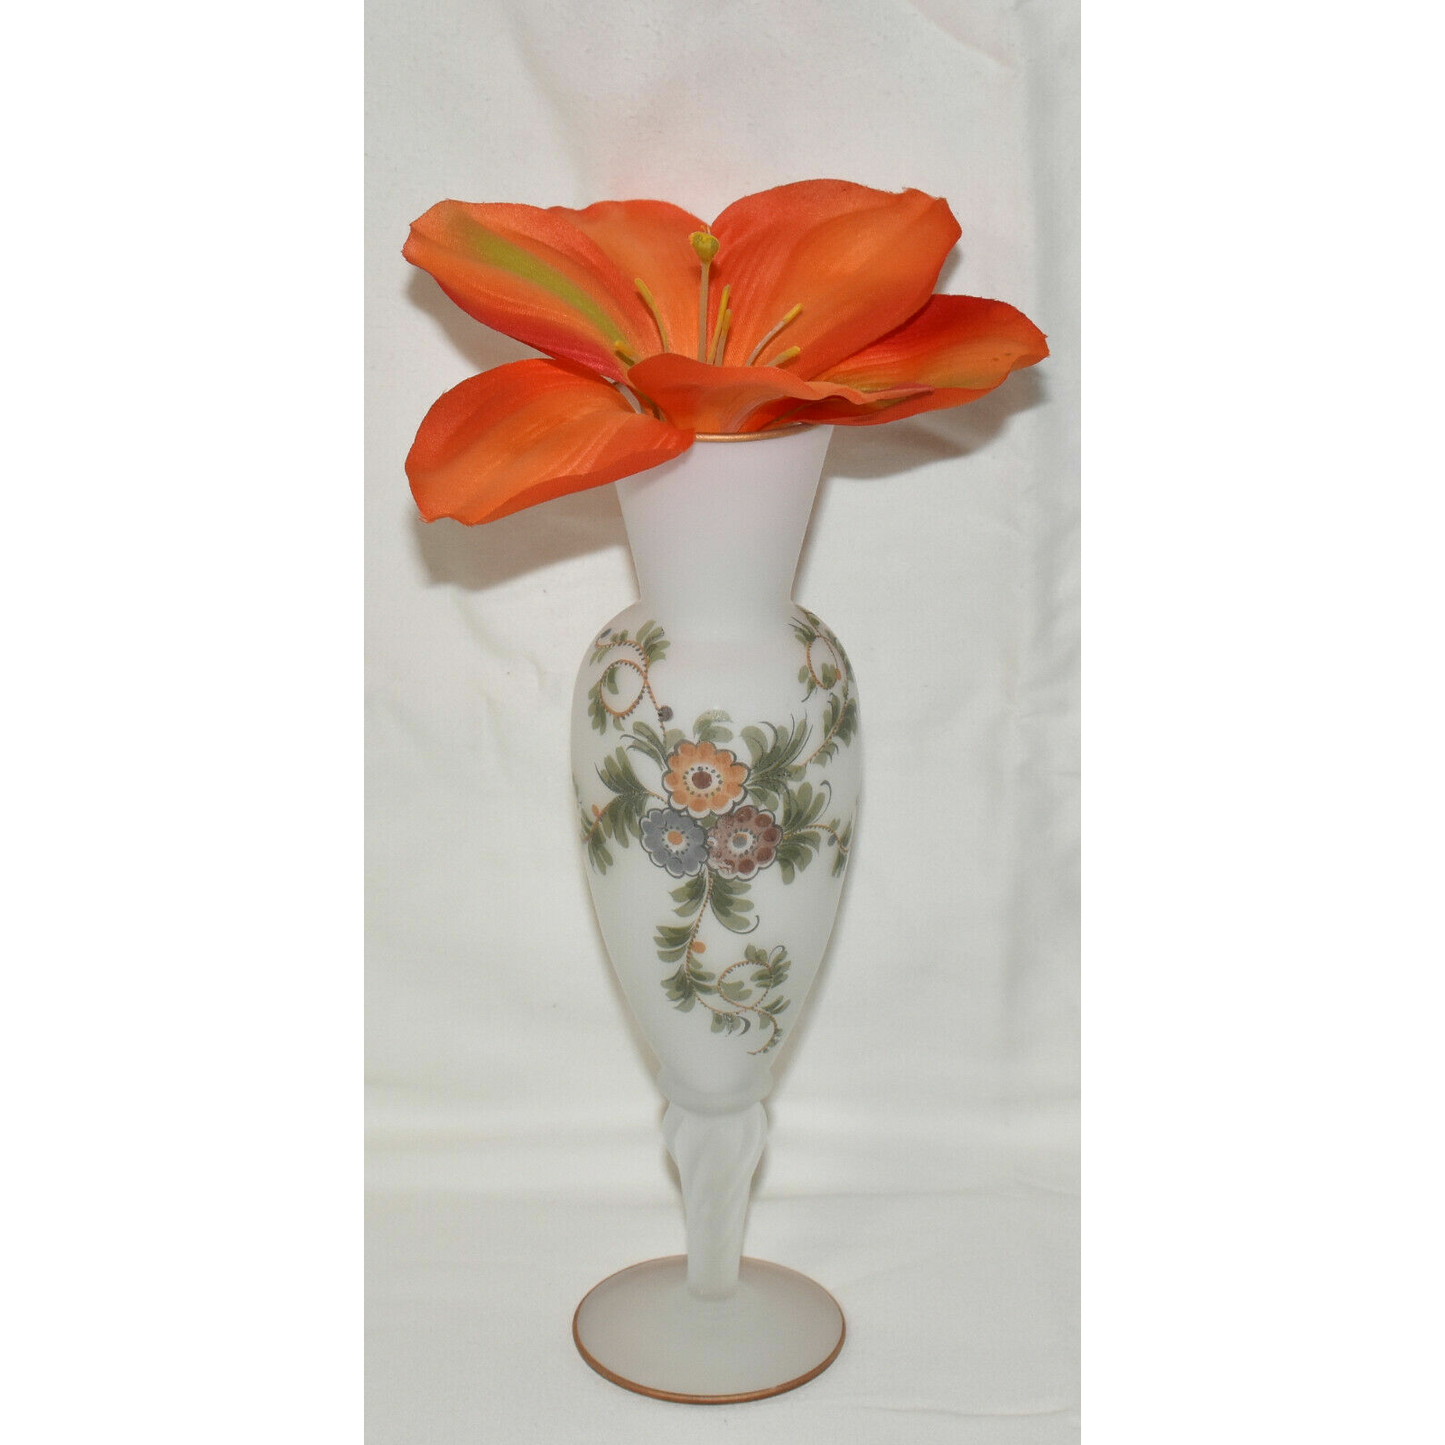 Vintage Frosted Encased Glass Bud Vase White Frosted Glass Floral Motif Hand Painted